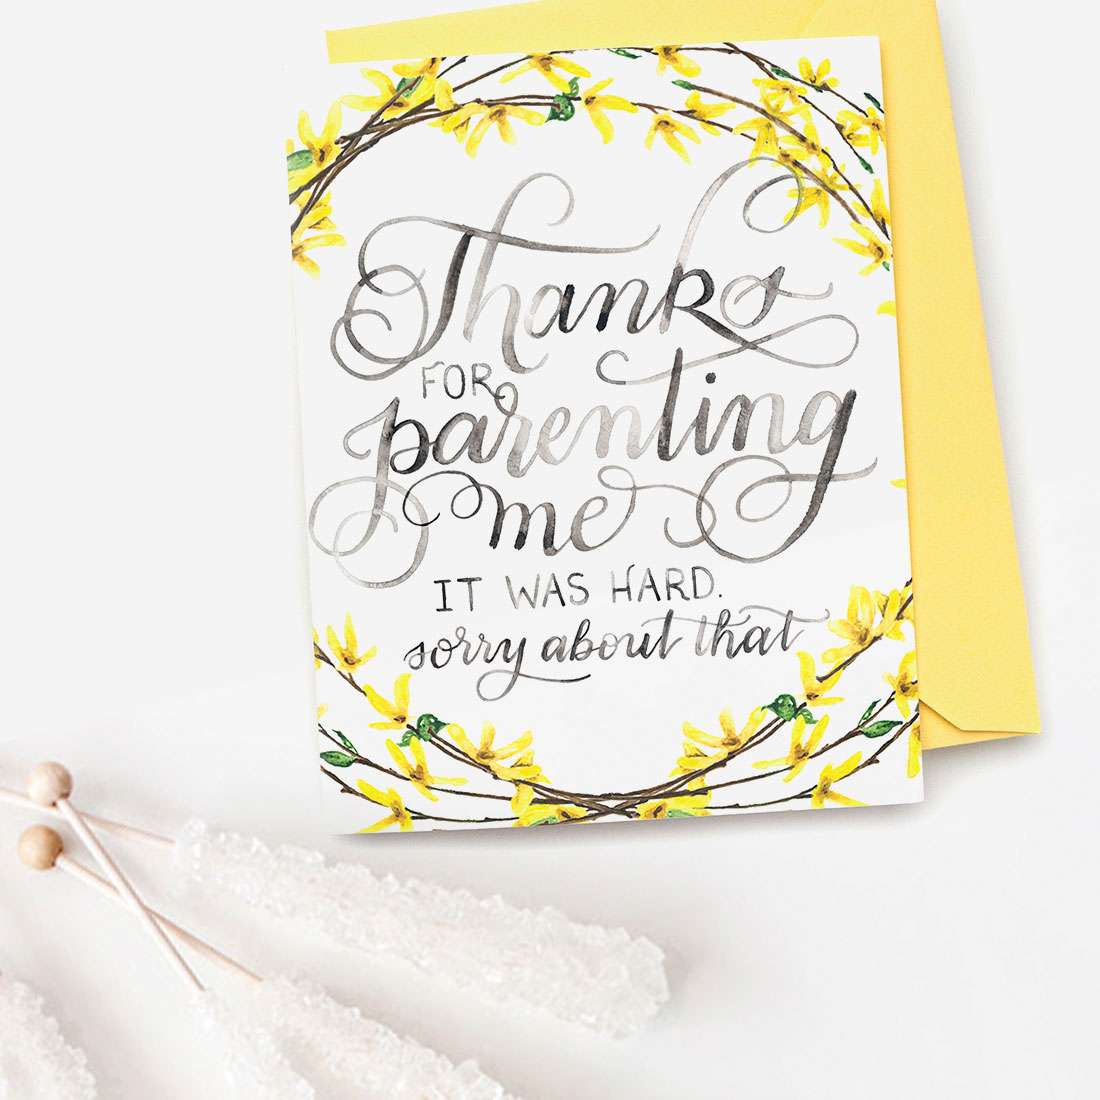 Image of a hand-lettered watercolor card saying "Thanks for parenting me... it was hard... sorry about that" with painted forsythia branches by CharmCat | charmcat.net